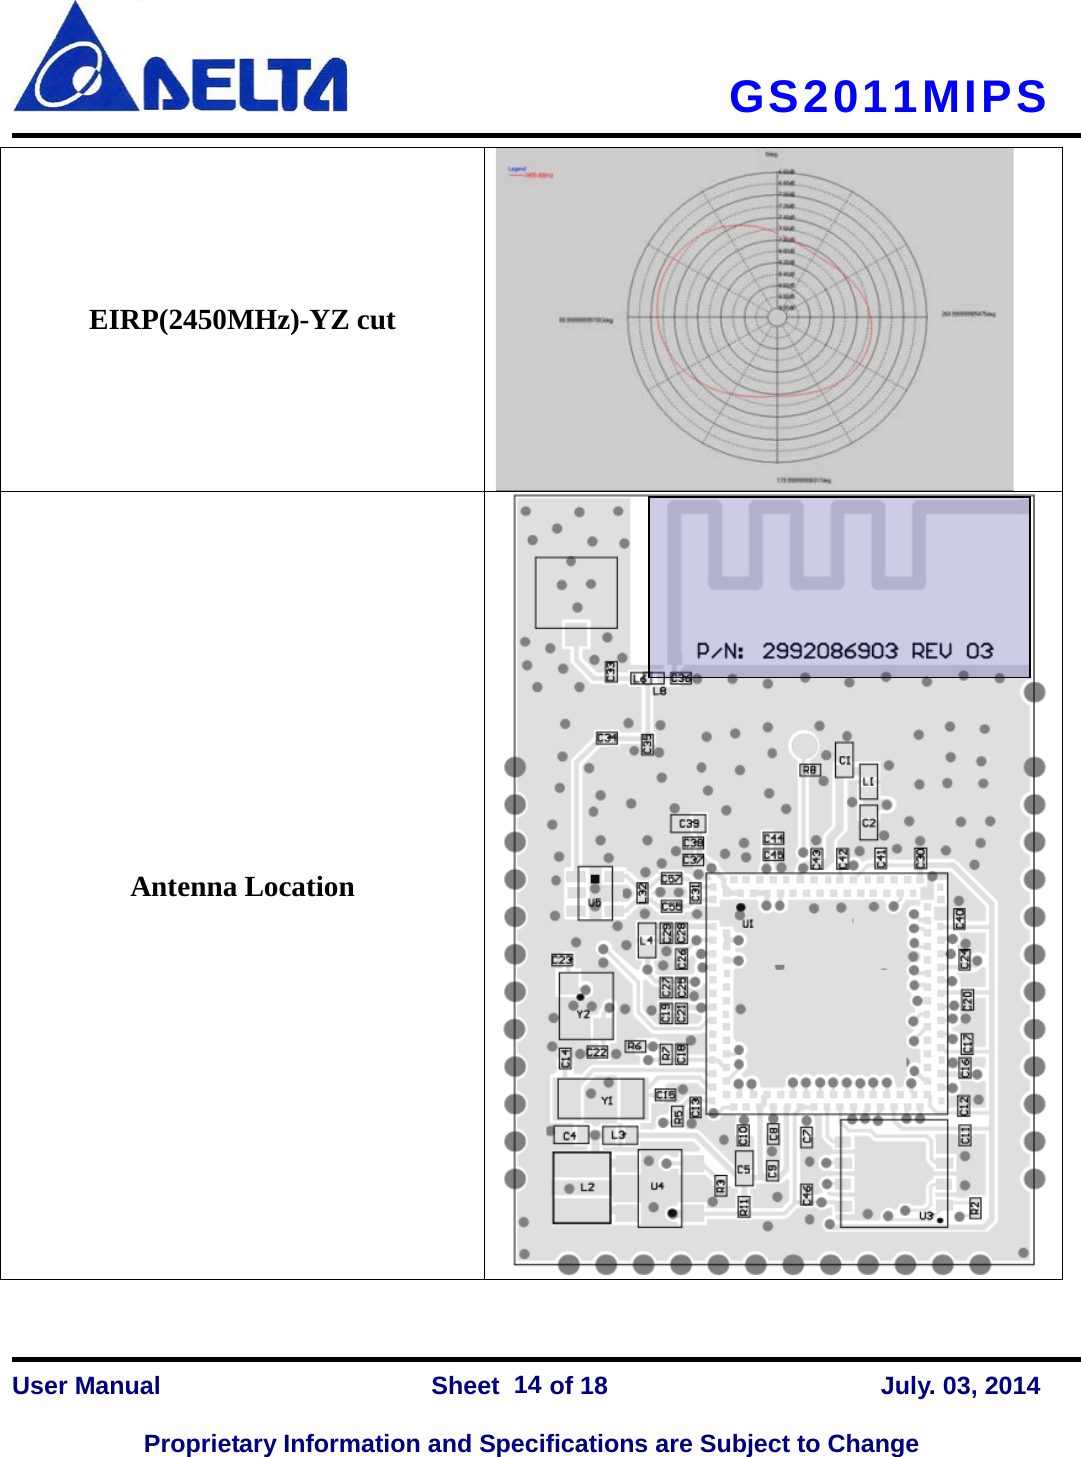     GS2011MIPS  EIRP(2450MHz)-YZ cut  Antenna Location     User Manual                Sheet    of 18      July. 03, 2014  Proprietary Information and Specifications are Subject to Change 14 